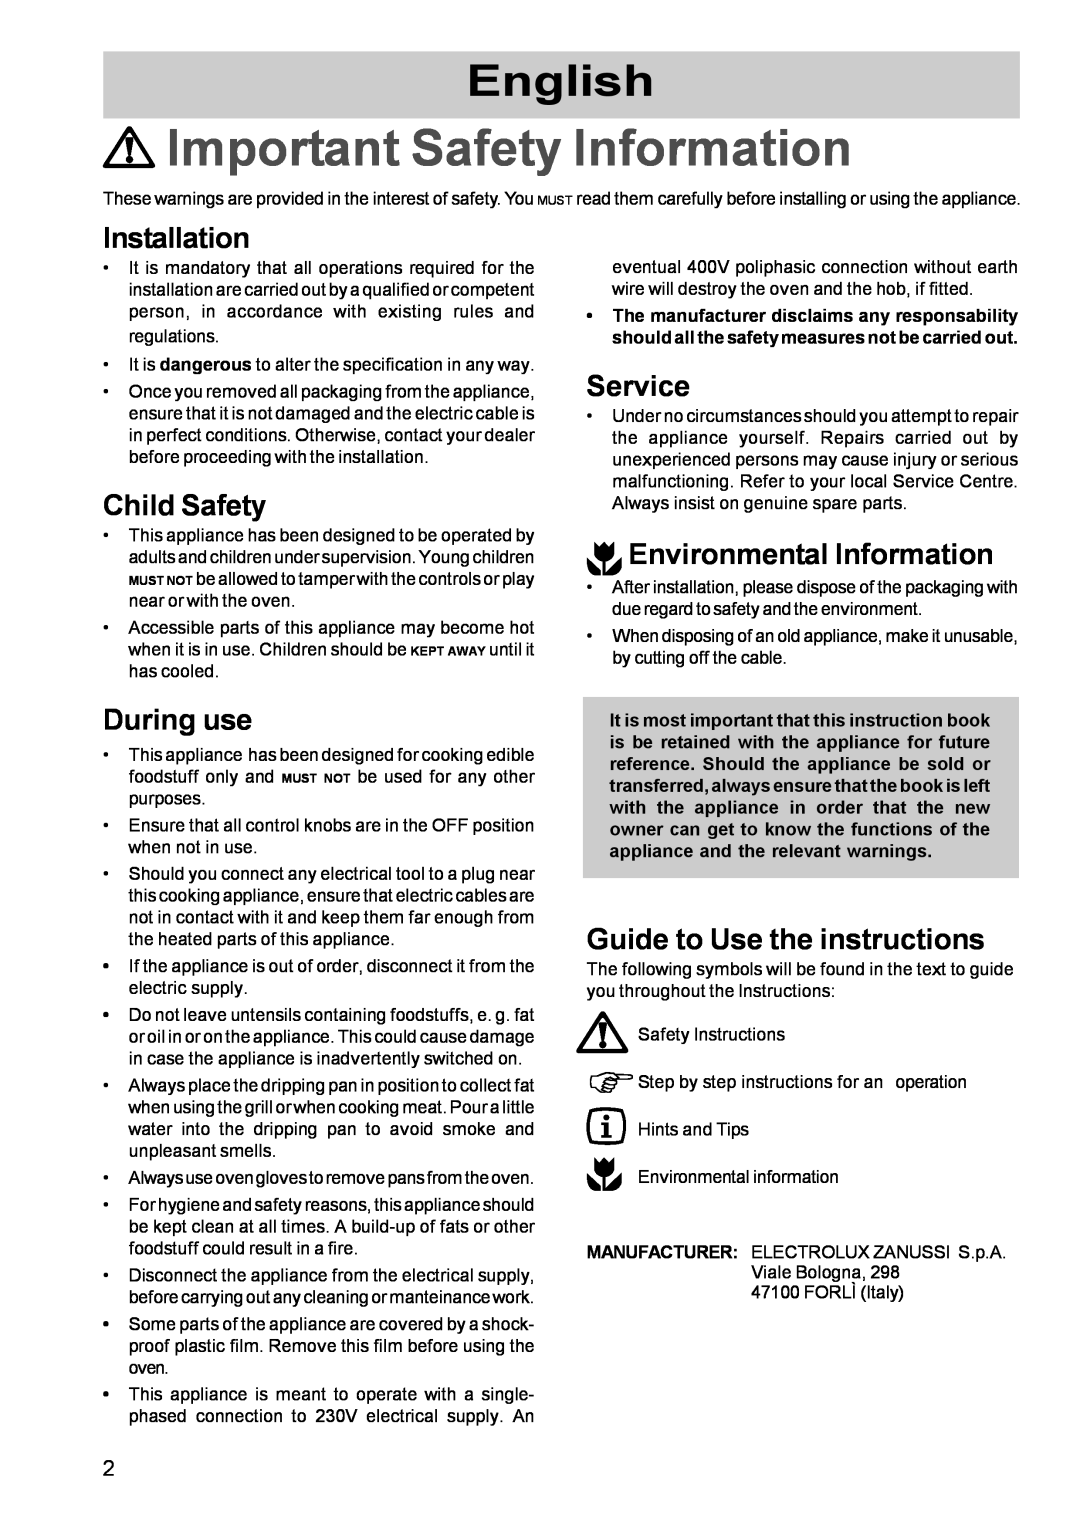 Zanussi ZBS 869 Installation, Child Safety, During use, Service, Environmental Information, Guide to Use the instructions 